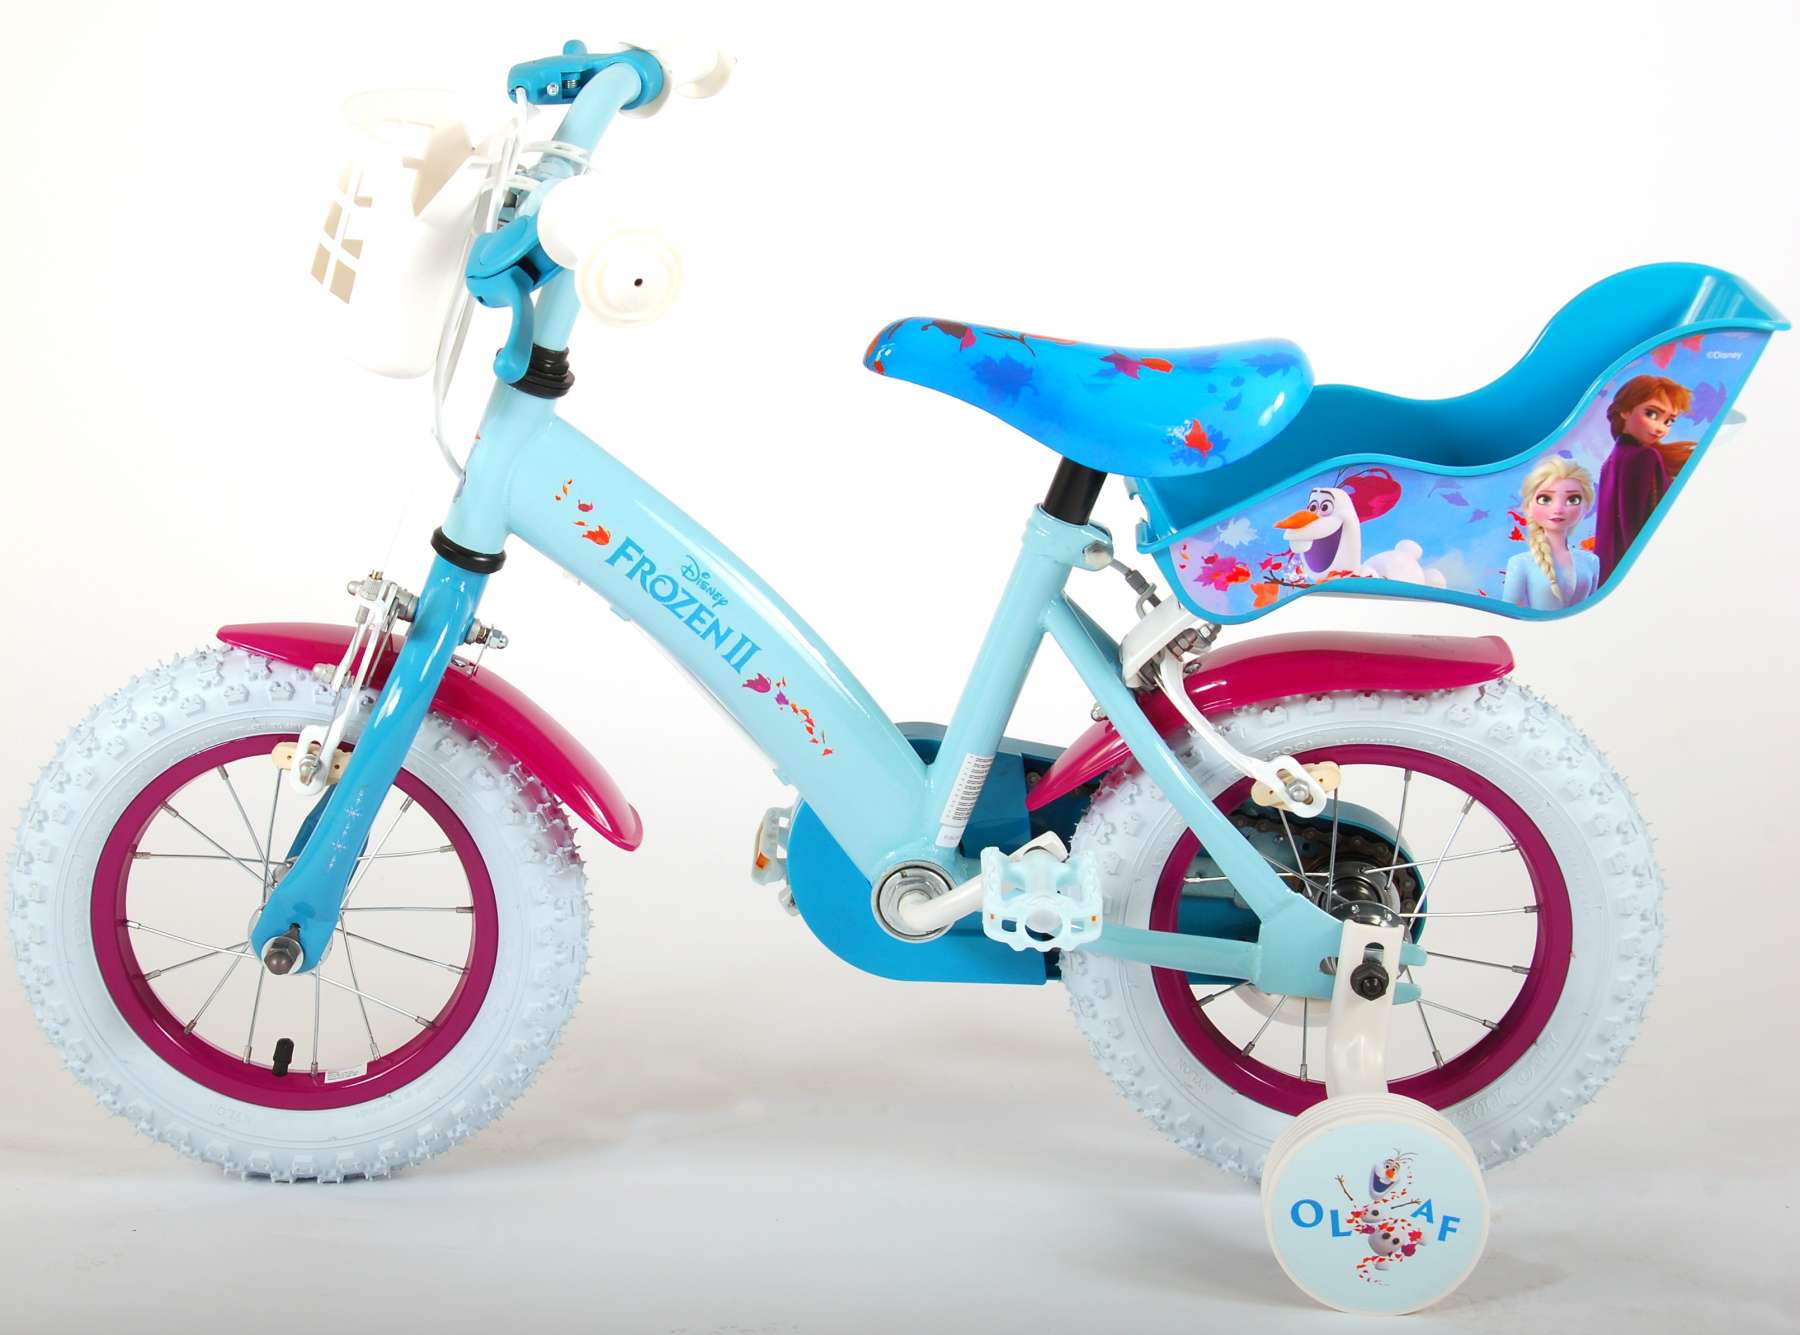 Girl Bike 12 Inch Disney Frozen 2 with Training Wheels Front Brake and Rear Coasterbrake Basket and Doll Carrier 95% Assembled Blue